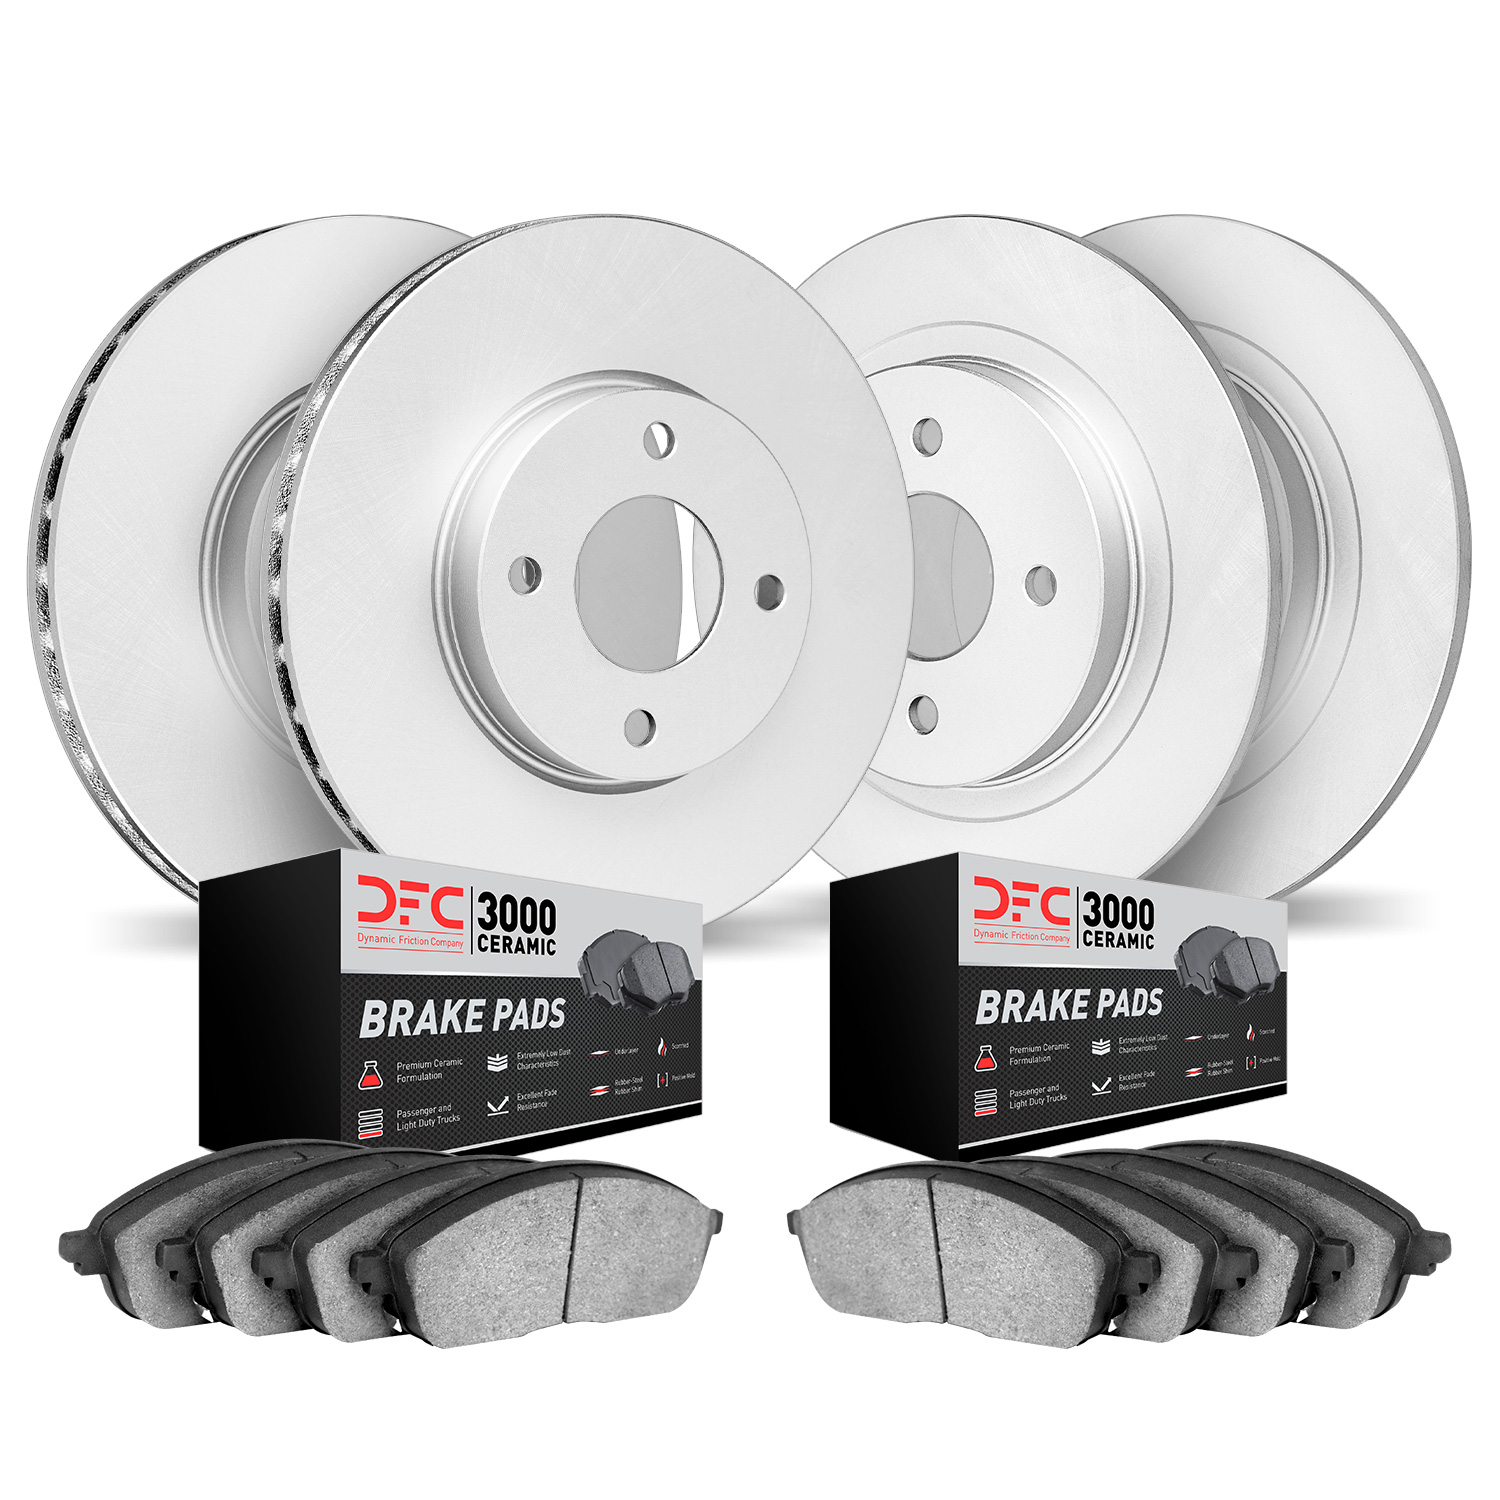 4304-67006 Geospec Brake Rotors with 3000-Series Ceramic Brake Pads Kit, 1989-1998 Infiniti/Nissan, Position: Front and Rear